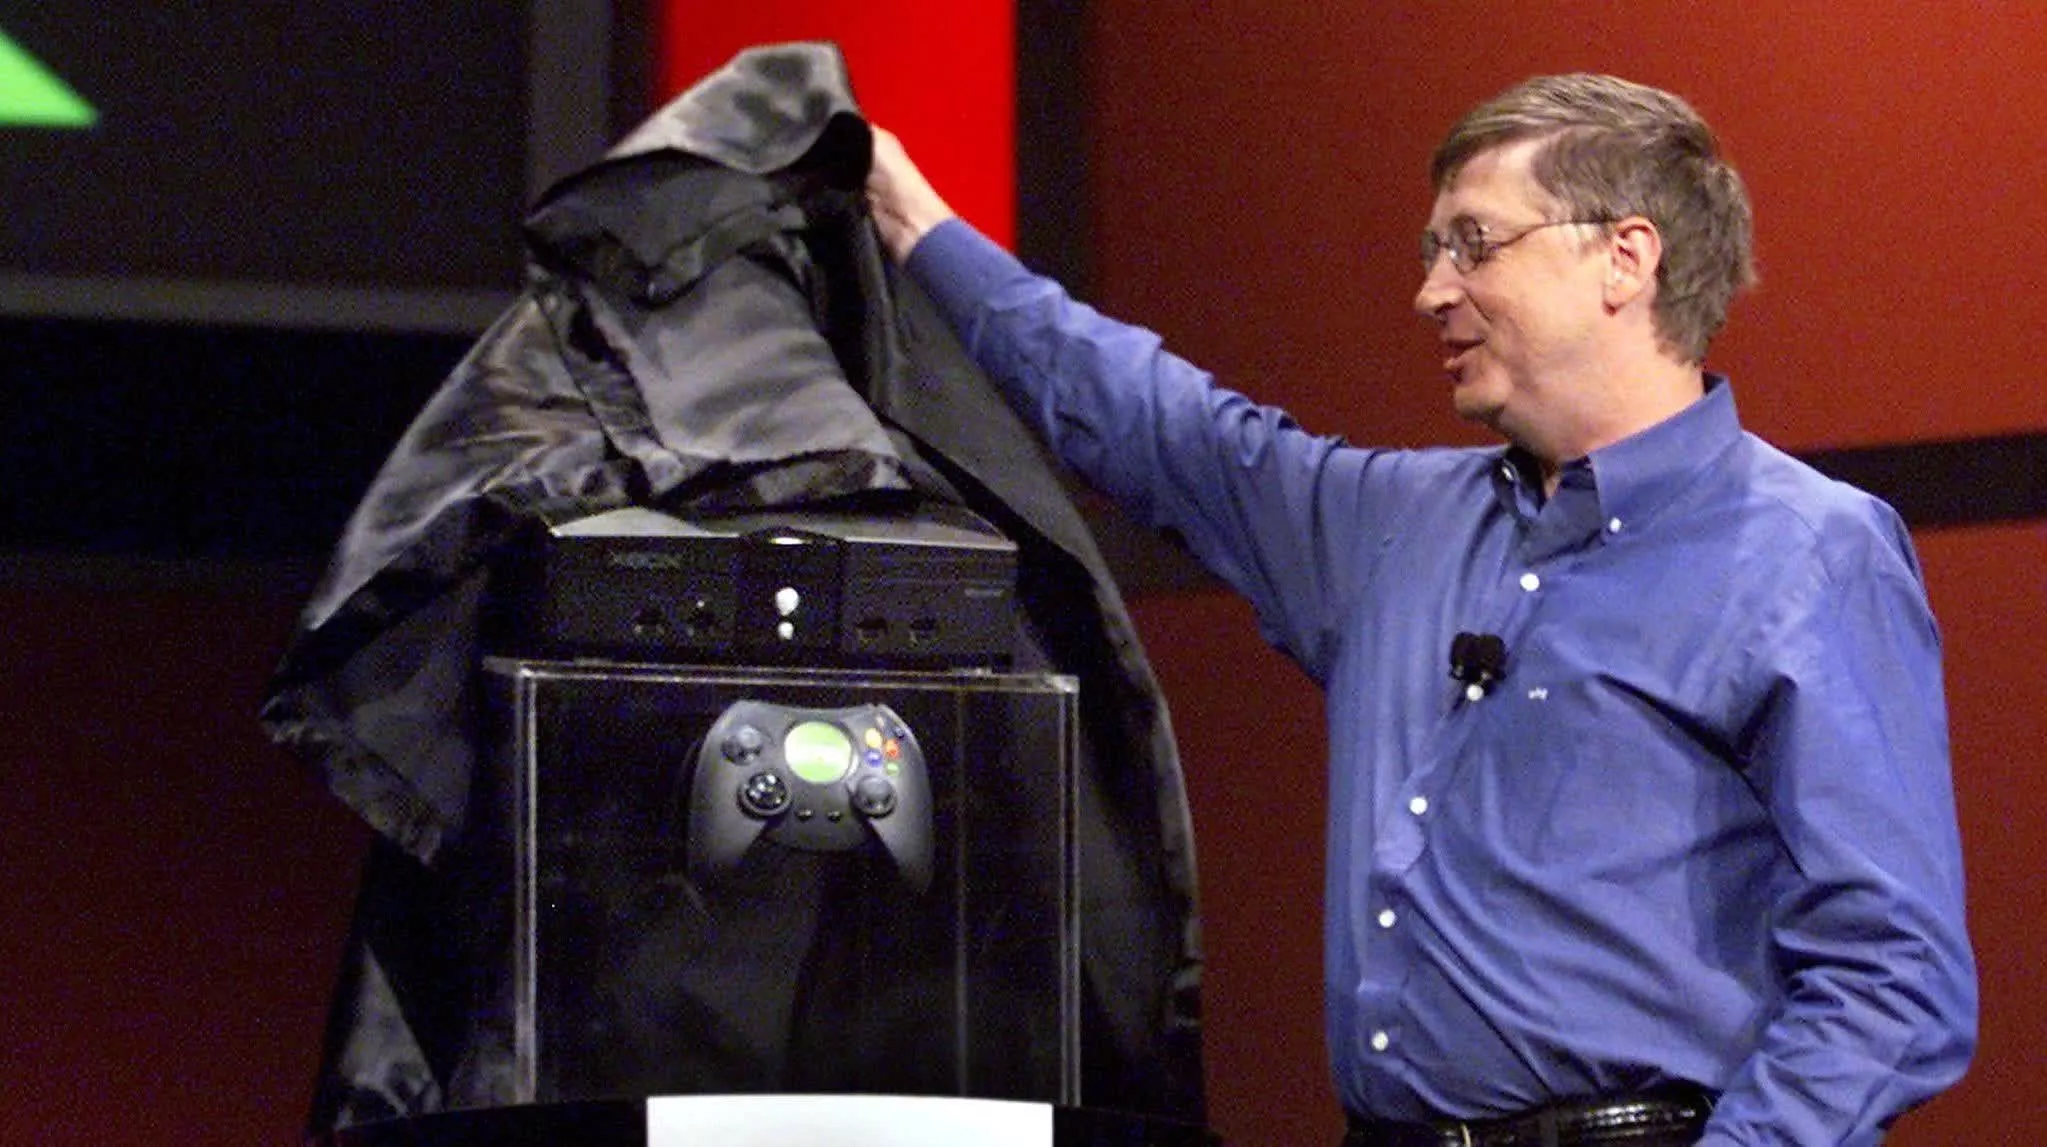 Xbox creator apologizes to AMD over last-minute switch to Intel CPUs 20 years ago